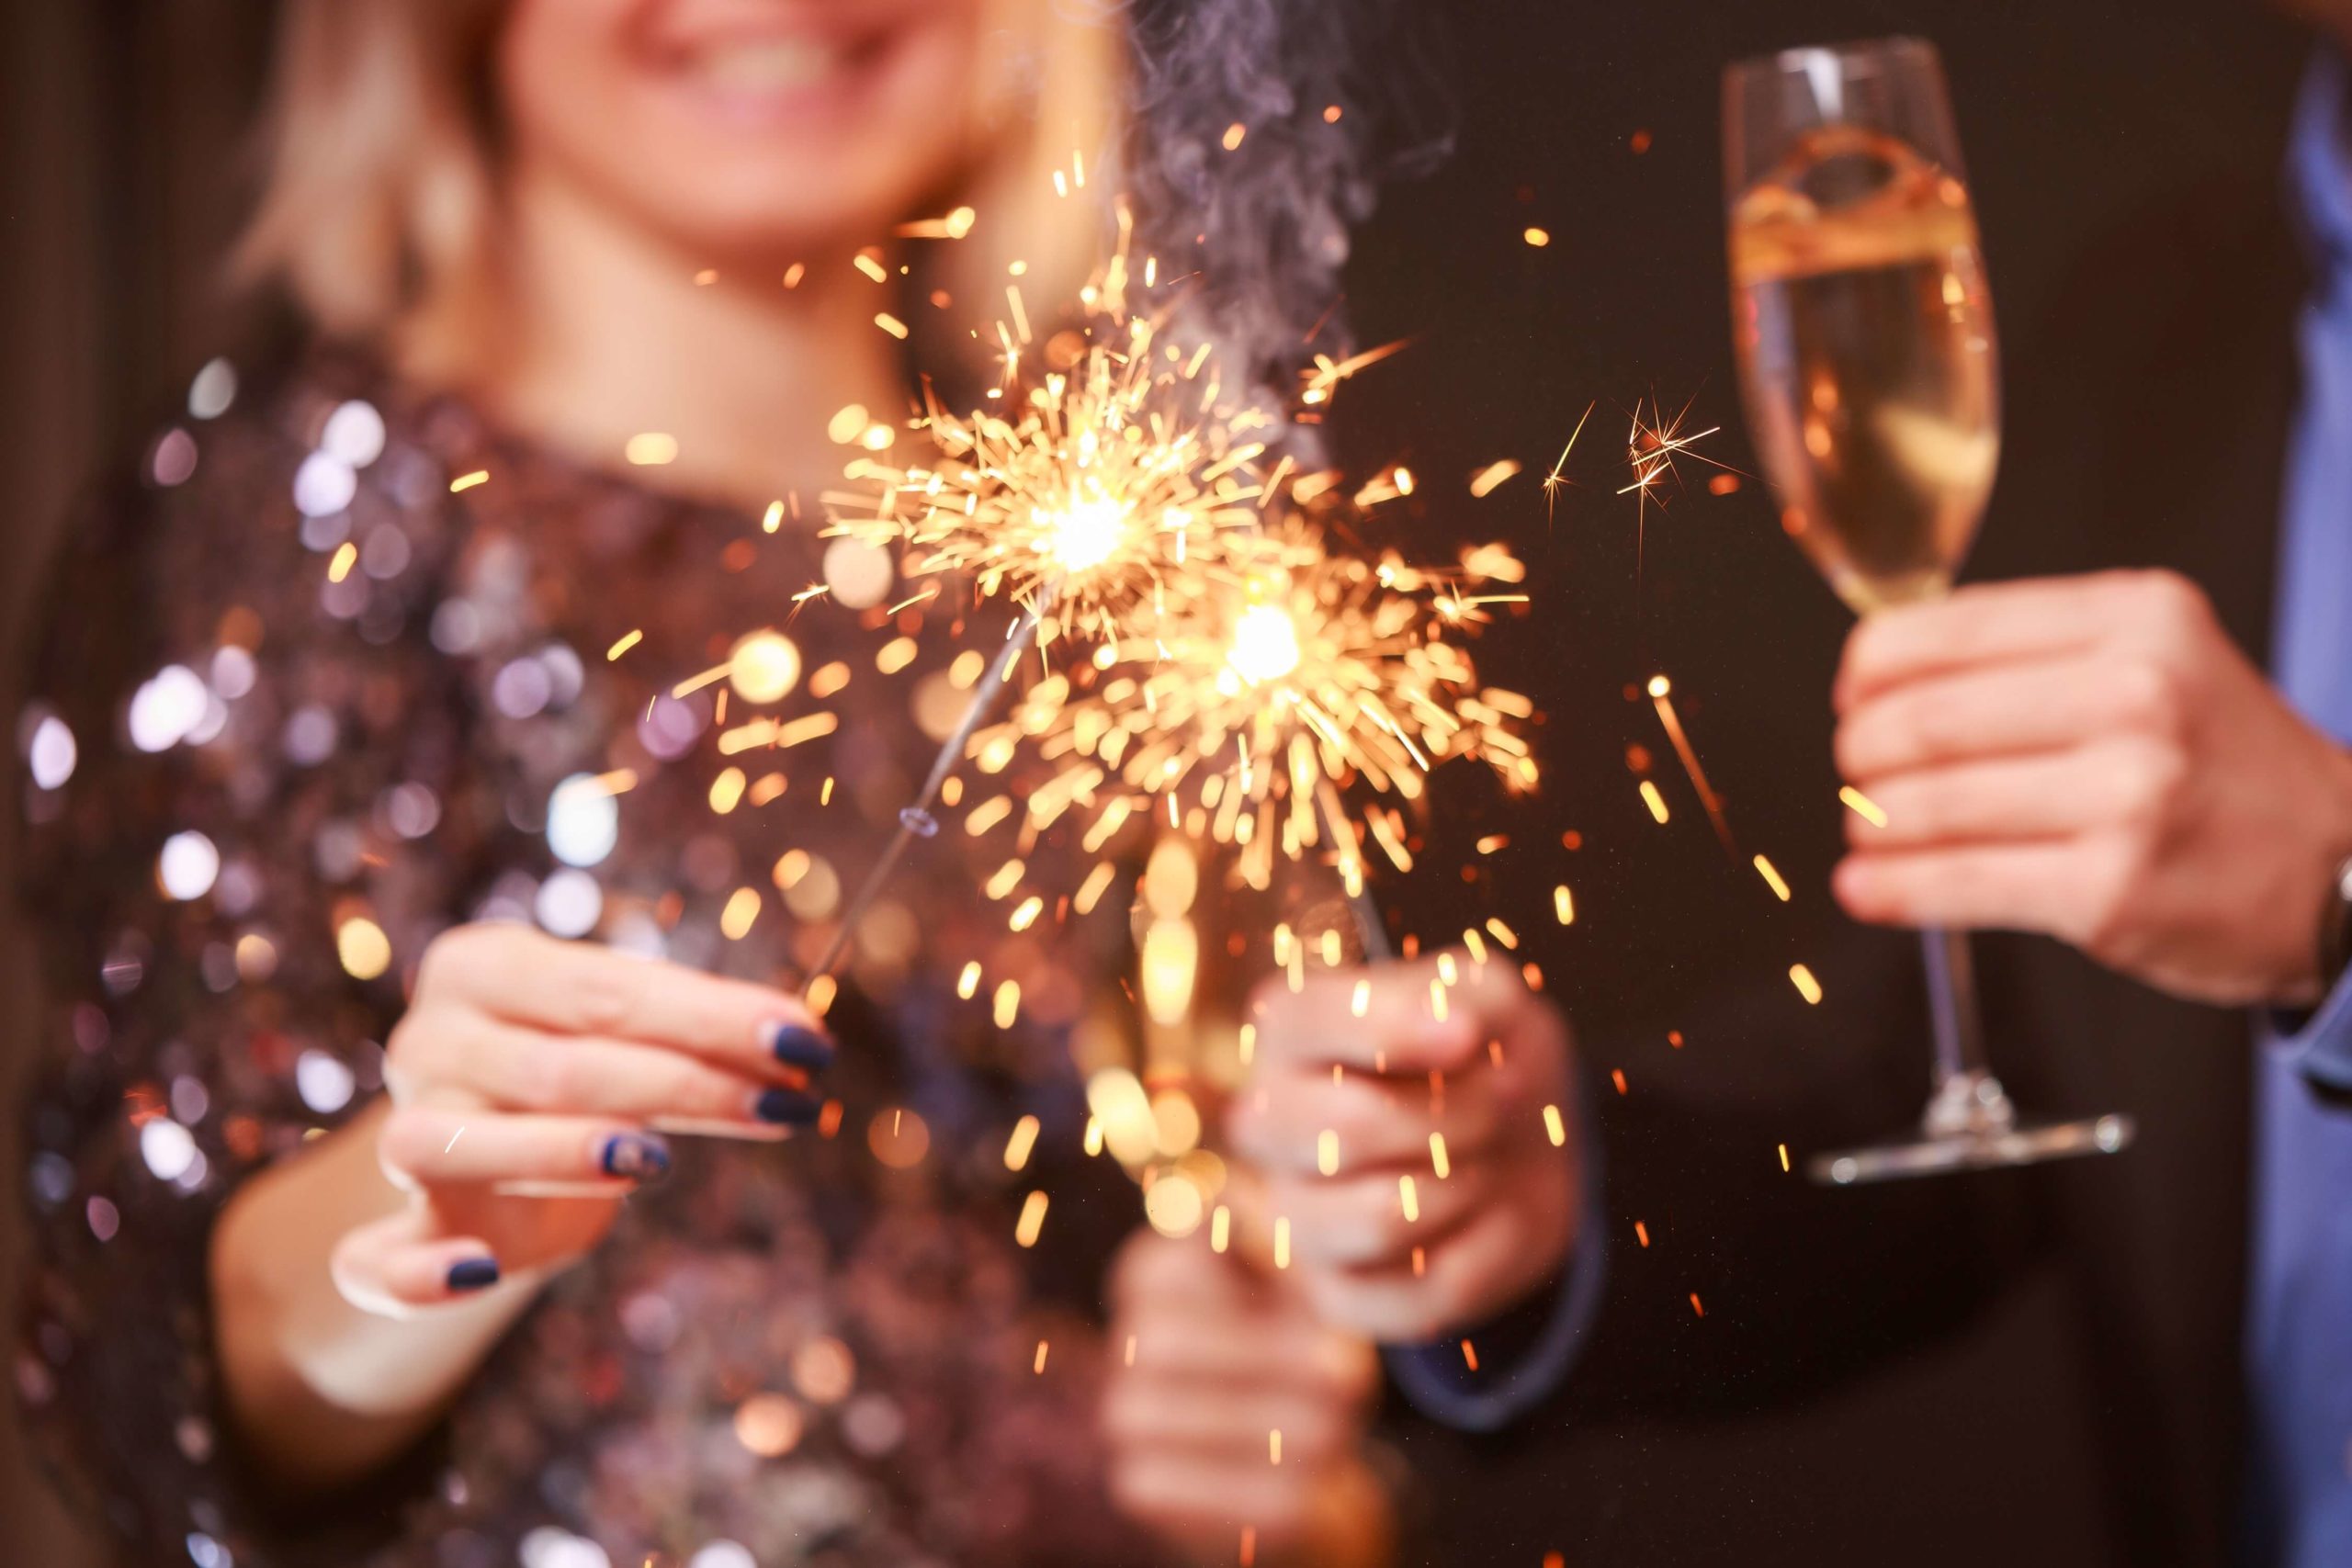 Sunriver Spots for Food & Drinks To Ring In The New Year